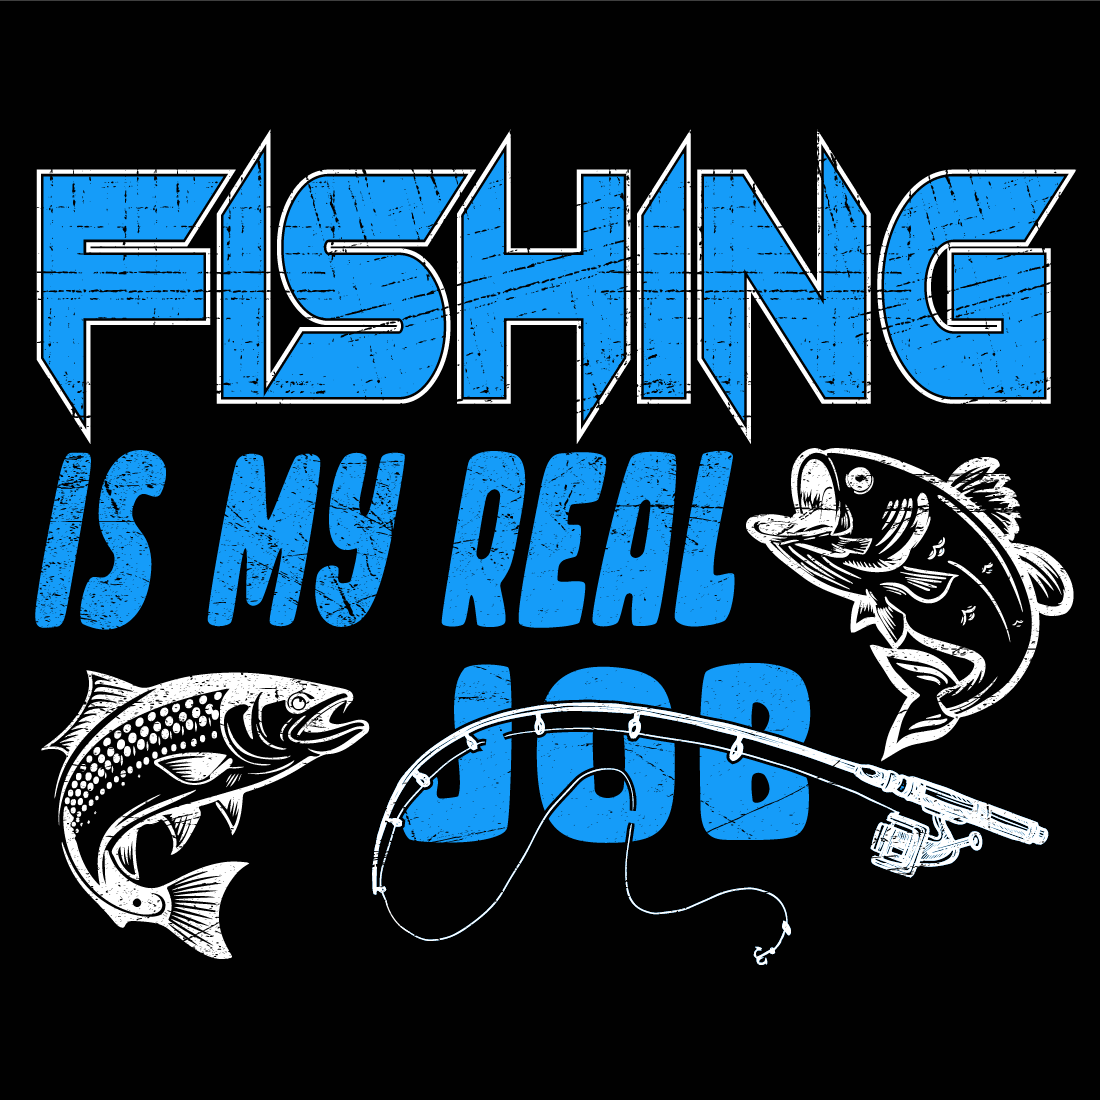 Fishing is my real job typography t-shirt design cover image.